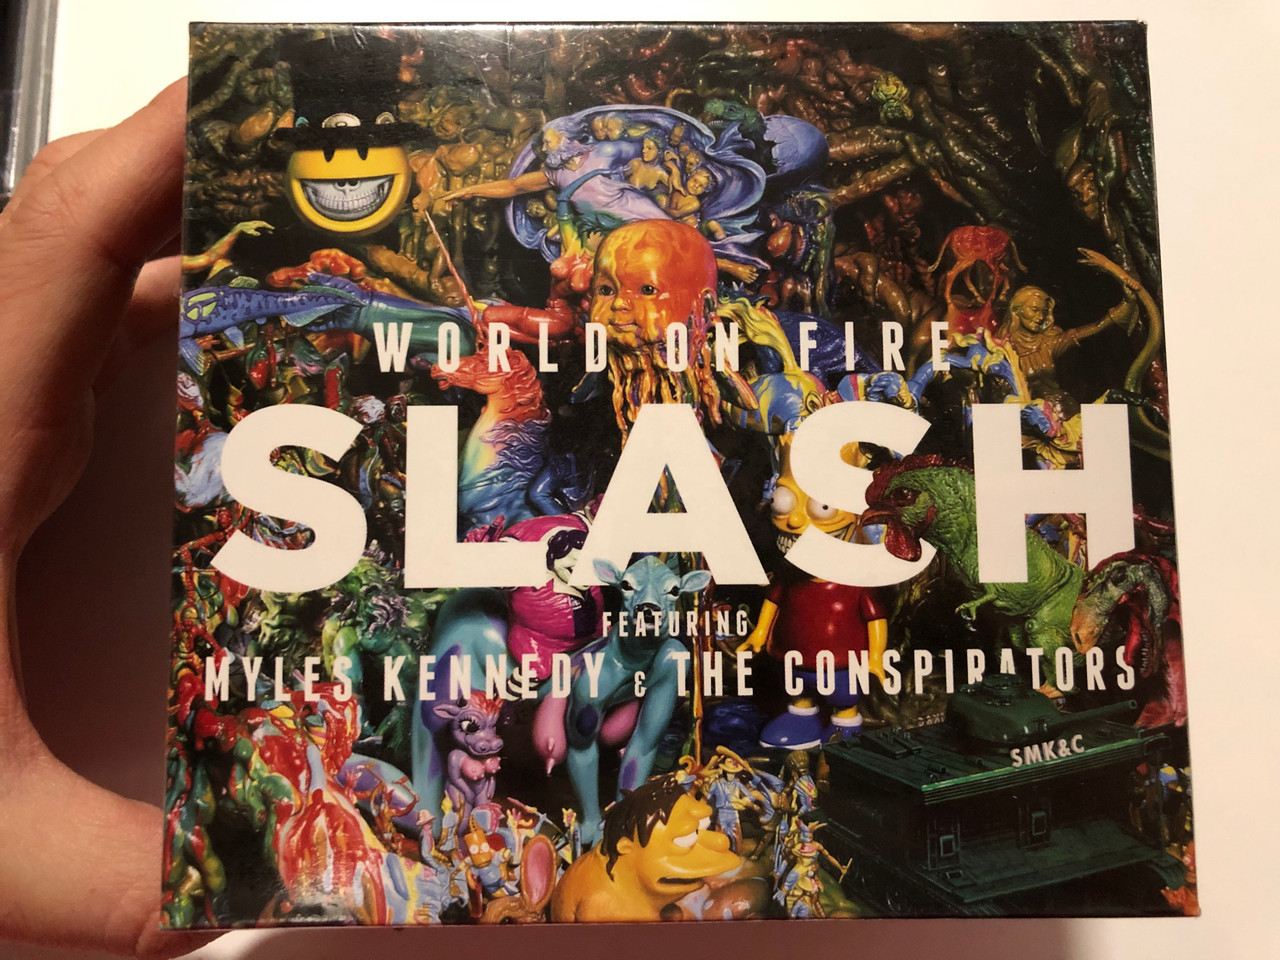 https://cdn10.bigcommerce.com/s-62bdpkt7pb/products/29809/images/177393/World_On_Fire_-_Slash_Featuring_Myles_Kennedy_And_The_Conspirators_Roadrunner_Records_Audio_CD_2014_0016861755812_1__86847.1620195018.1280.1280.JPG?c=2&_ga=2.52301344.844494949.1620659528-206537564.1620659528